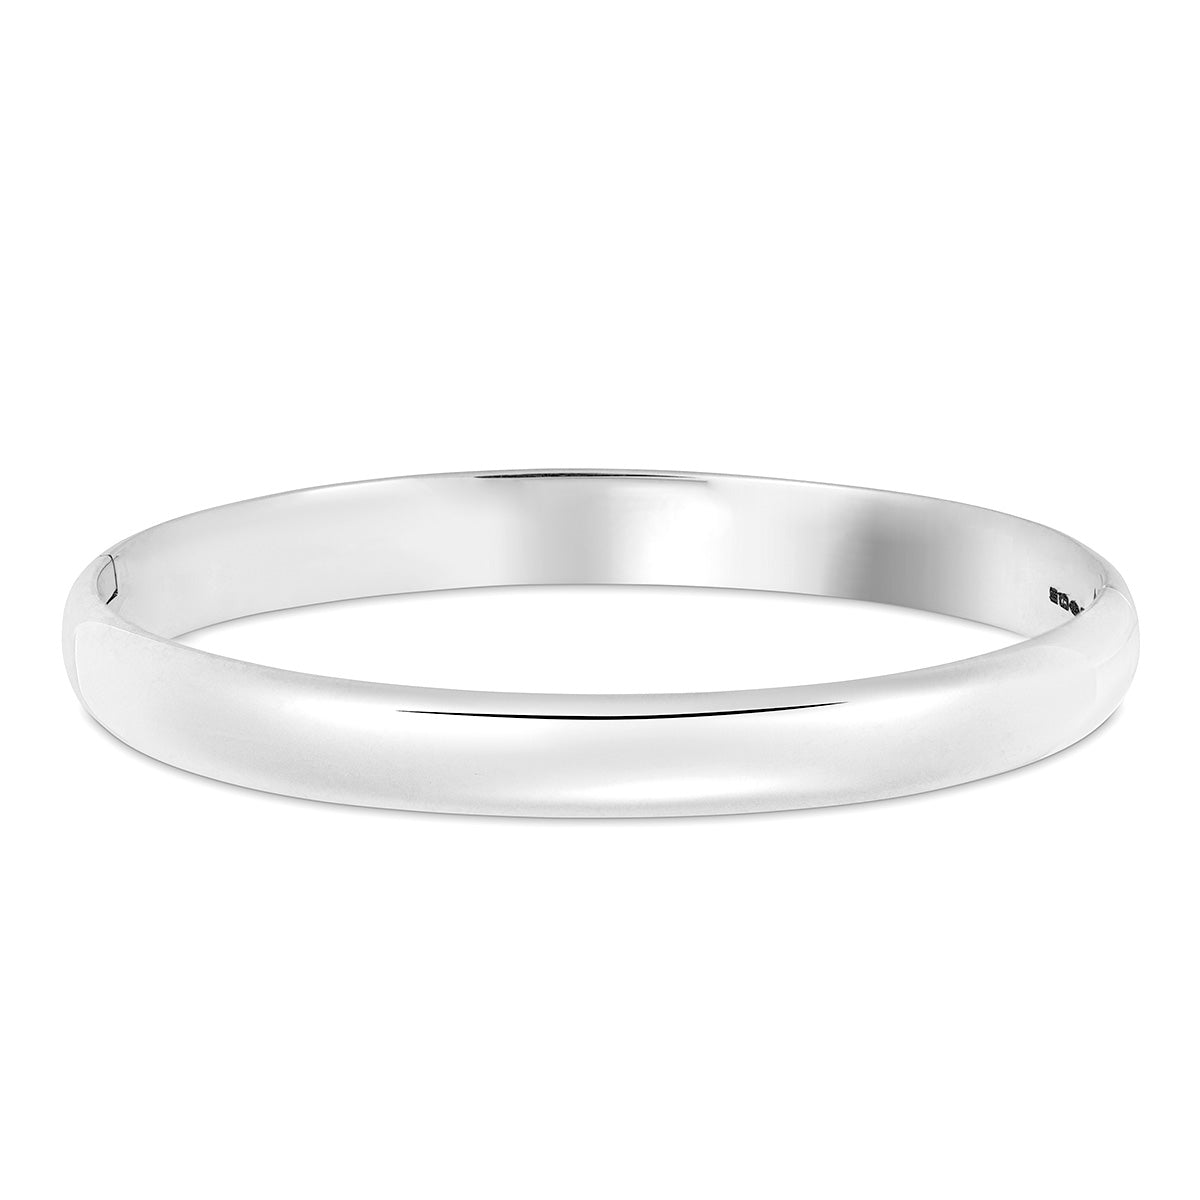 Silver Hinged Oval Bangle | Hersey & Son Silversmiths